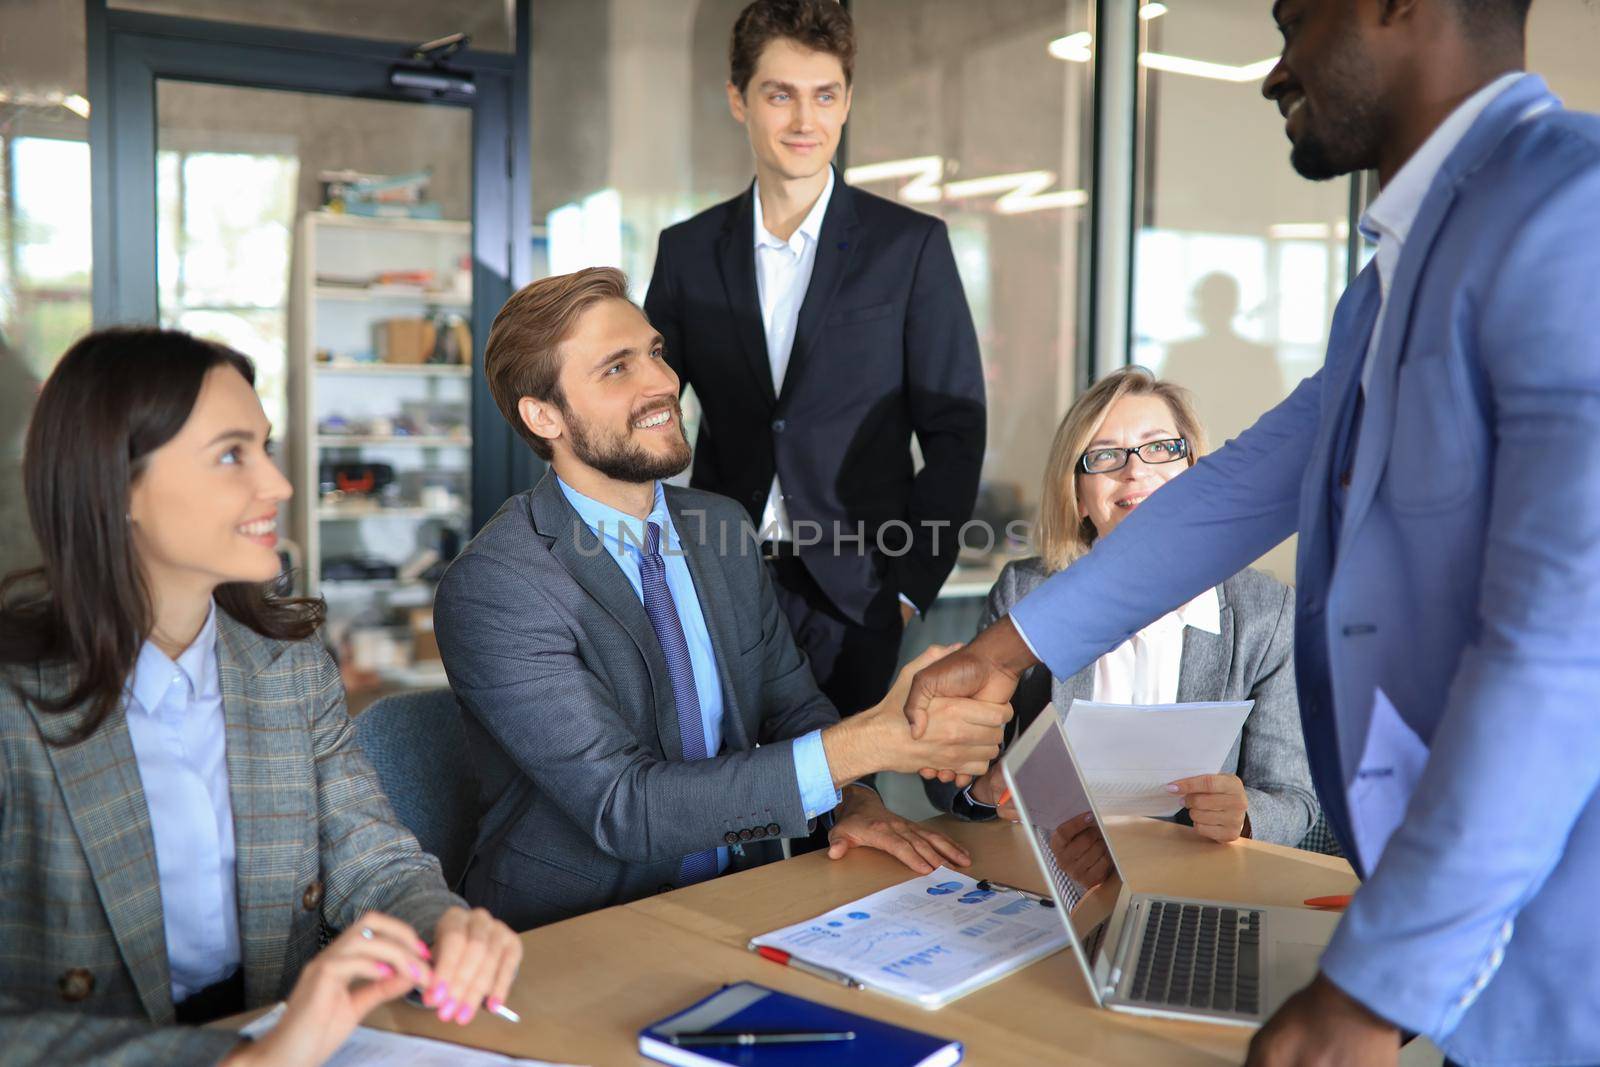 Business people shaking hands on a company meeting